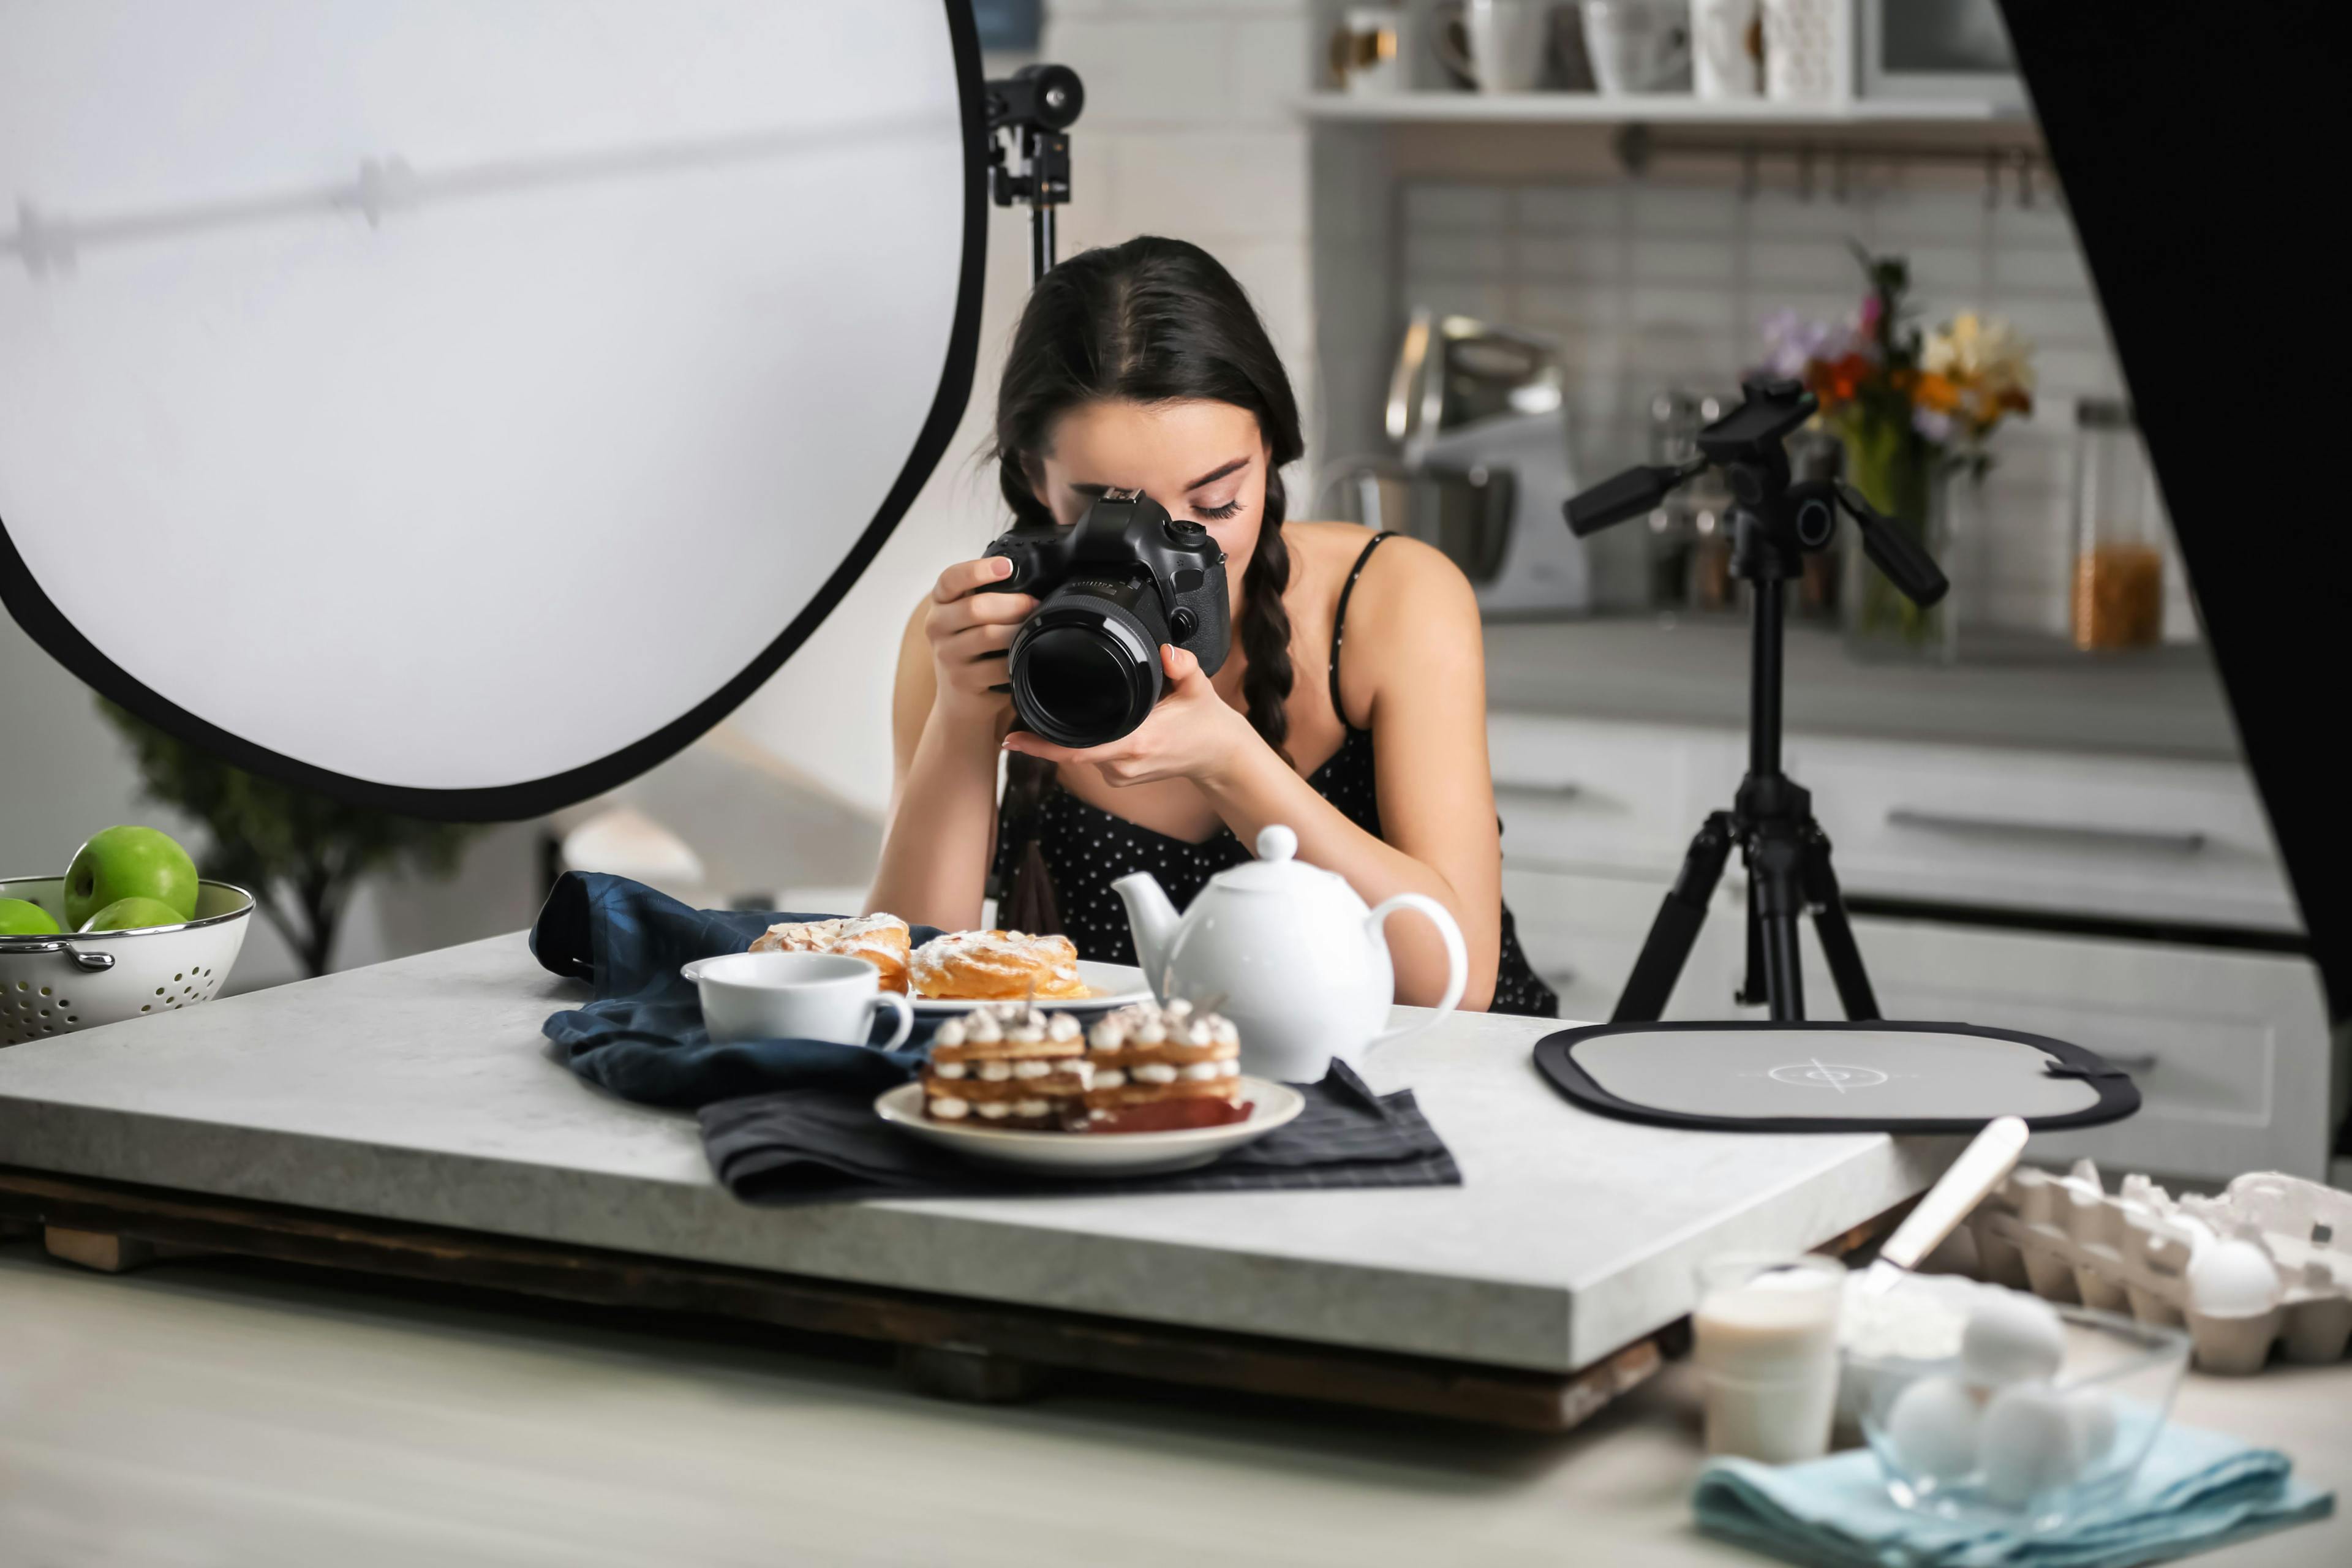 Food photography for digital menus: Woman capturing table spread.